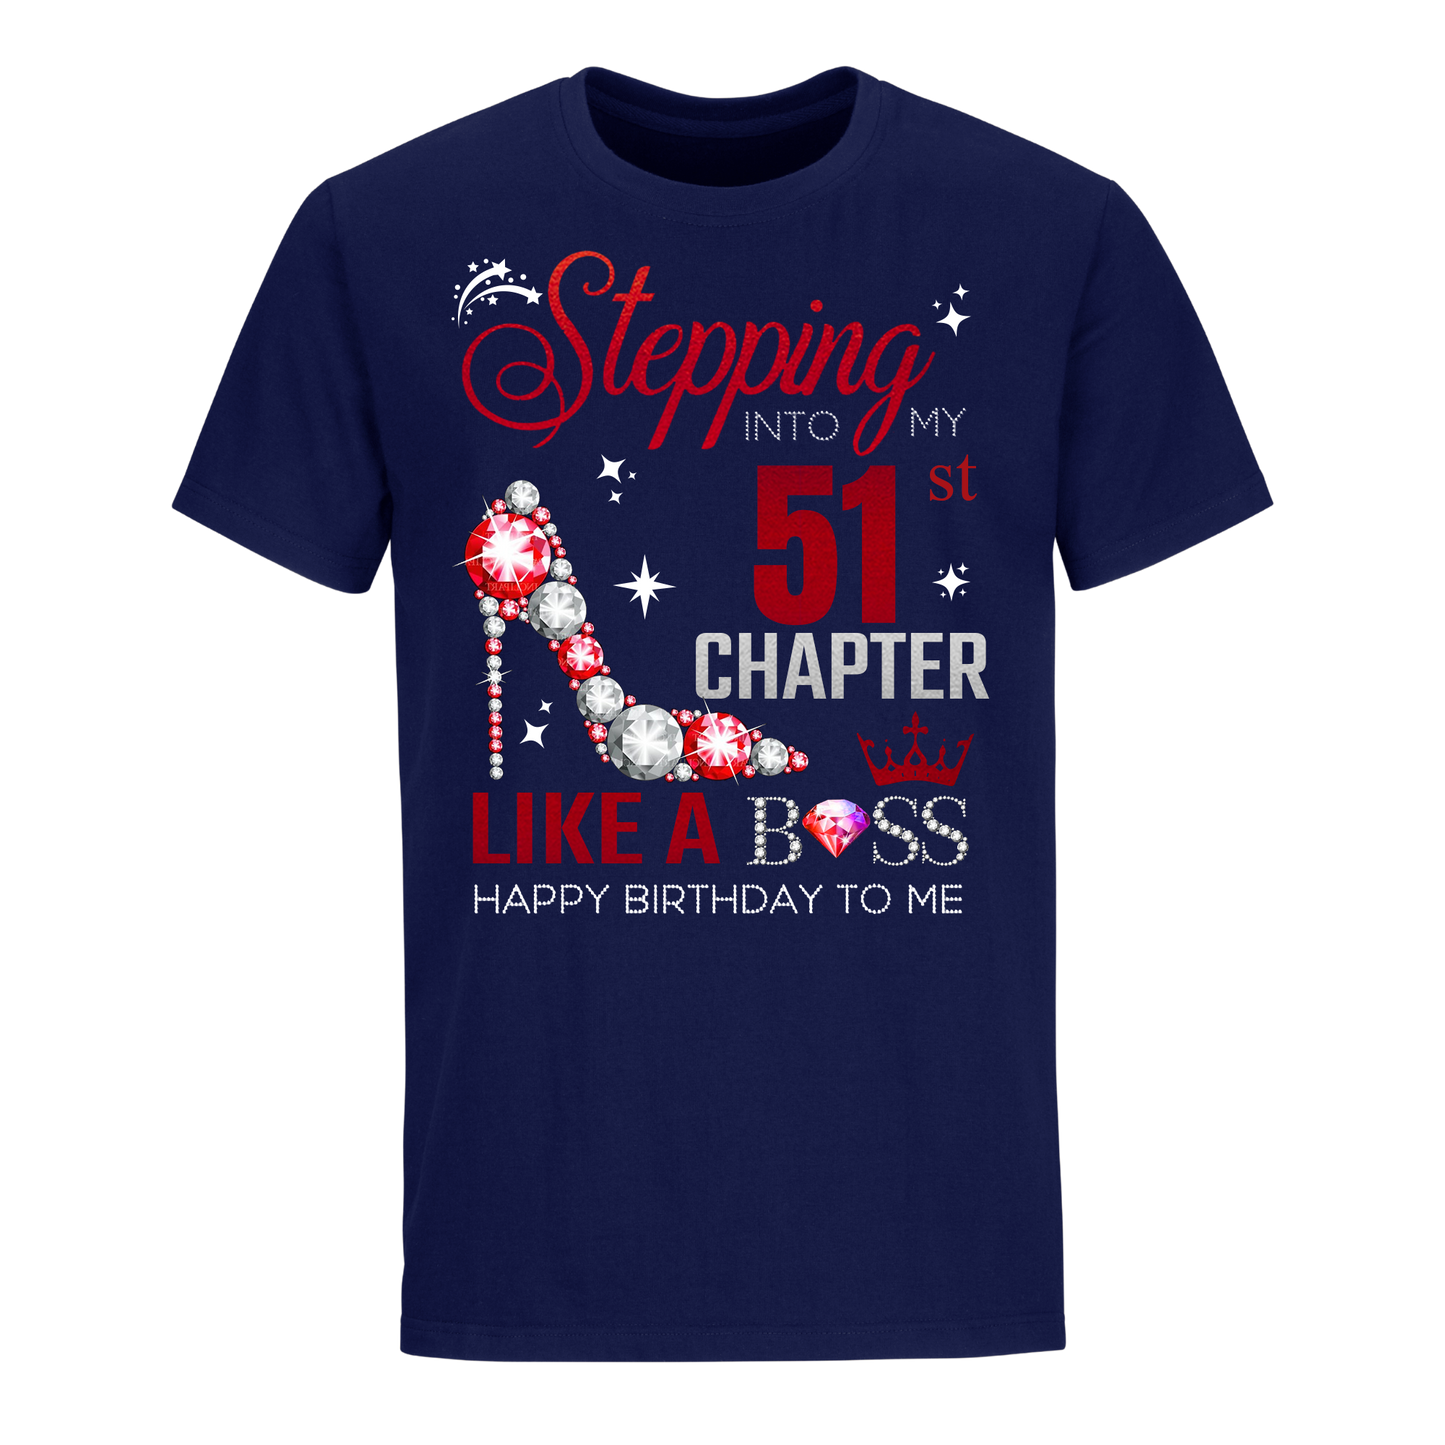 STEPPING INTO MY 51ST CHAPTER UNISEX SHIRT